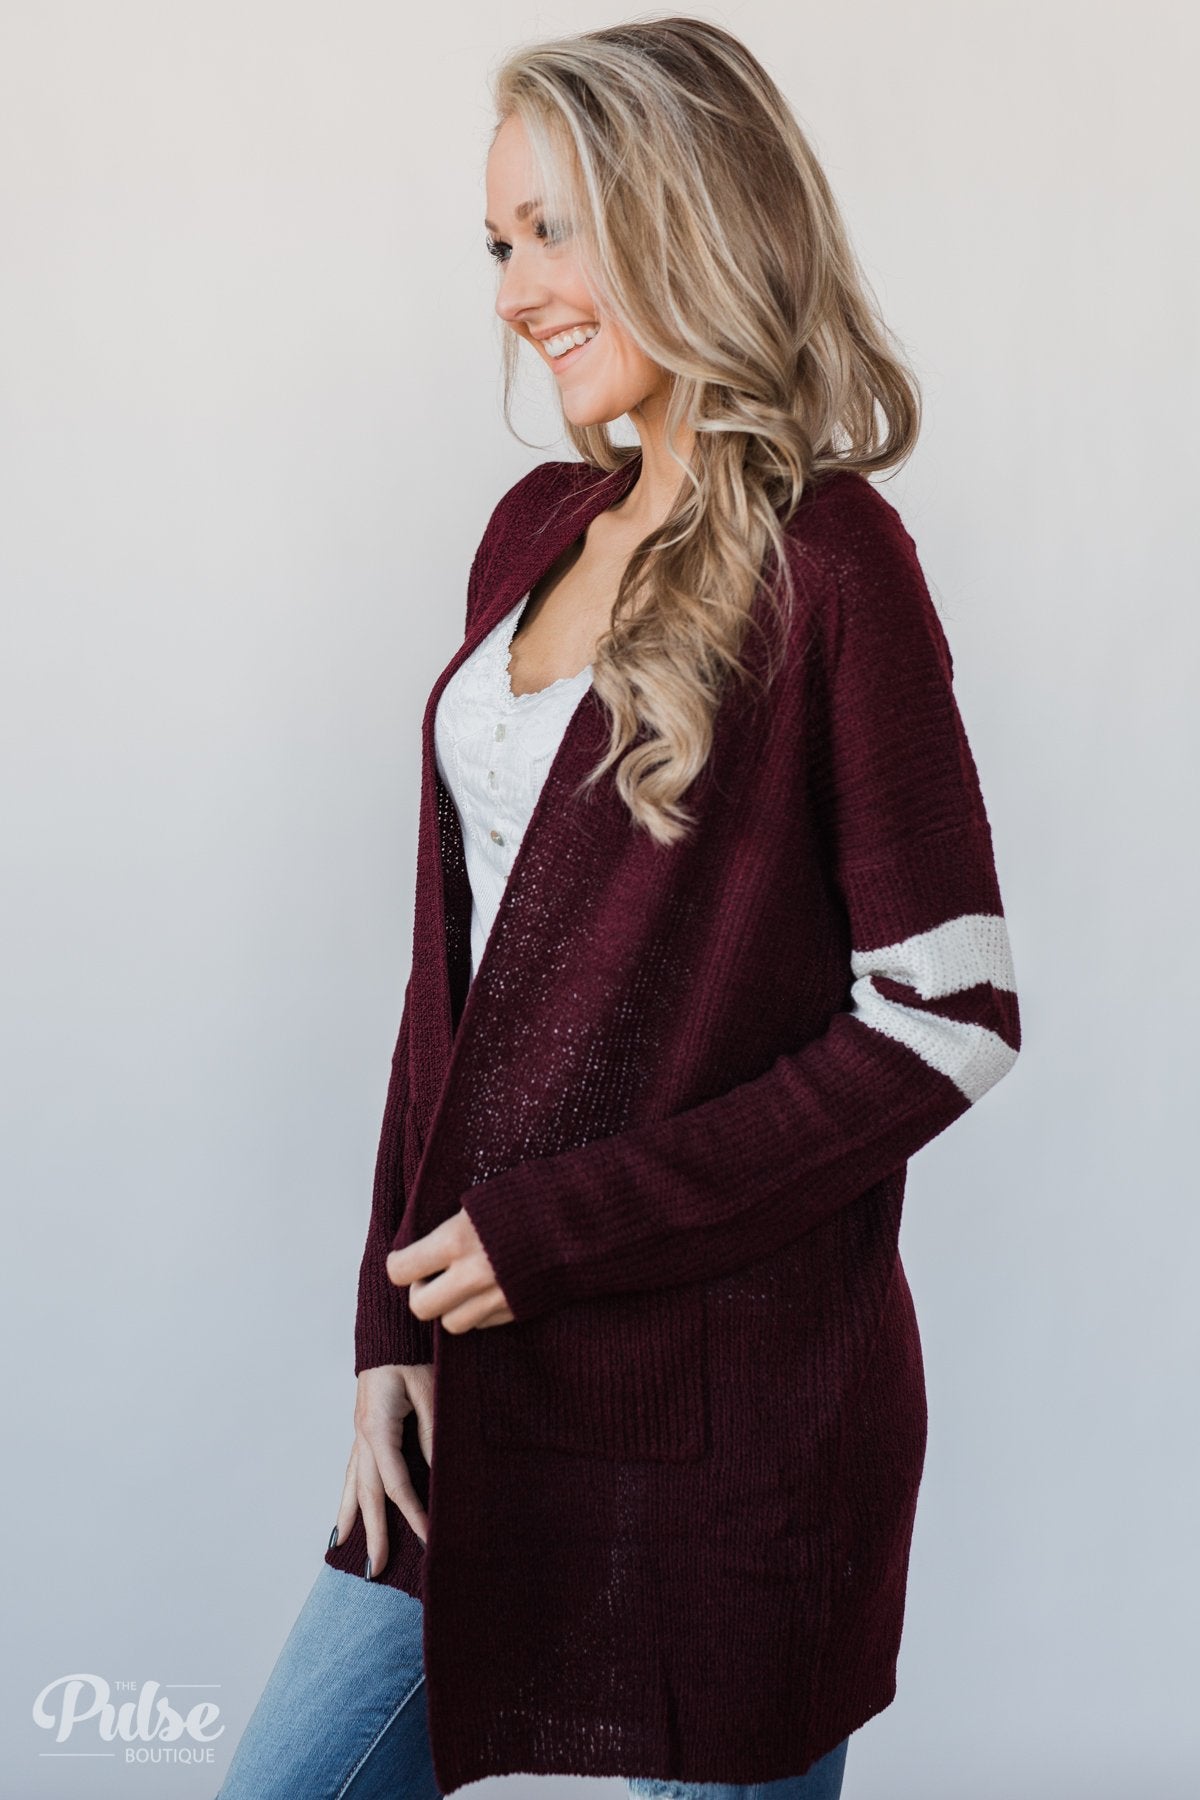 Varsity Stripe Knitted Cardigan- Burgundy – The Pulse Boutique